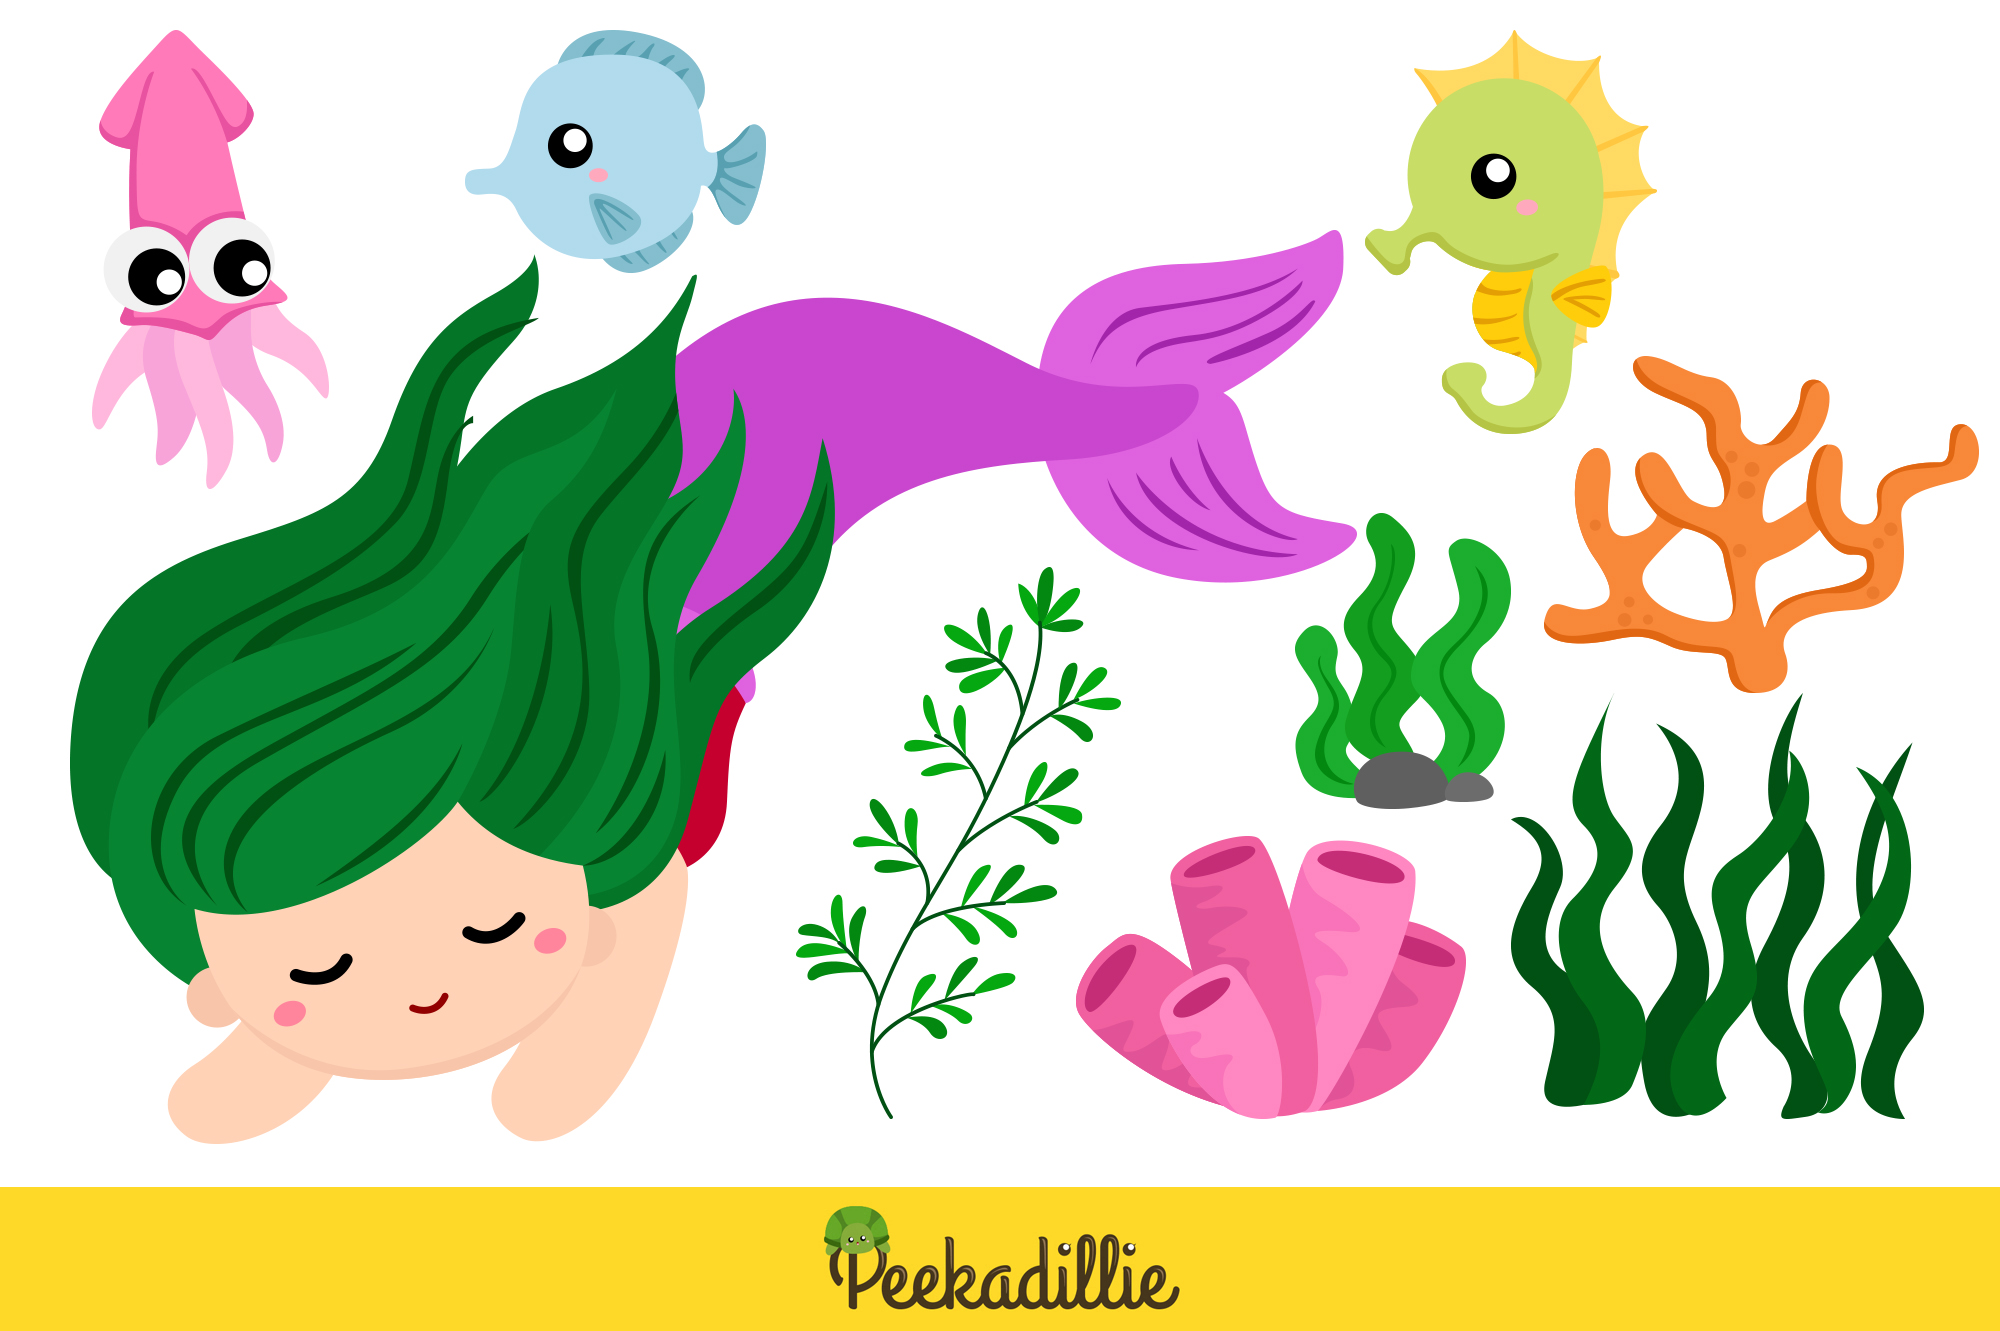 Little girl with green hair under the sea.